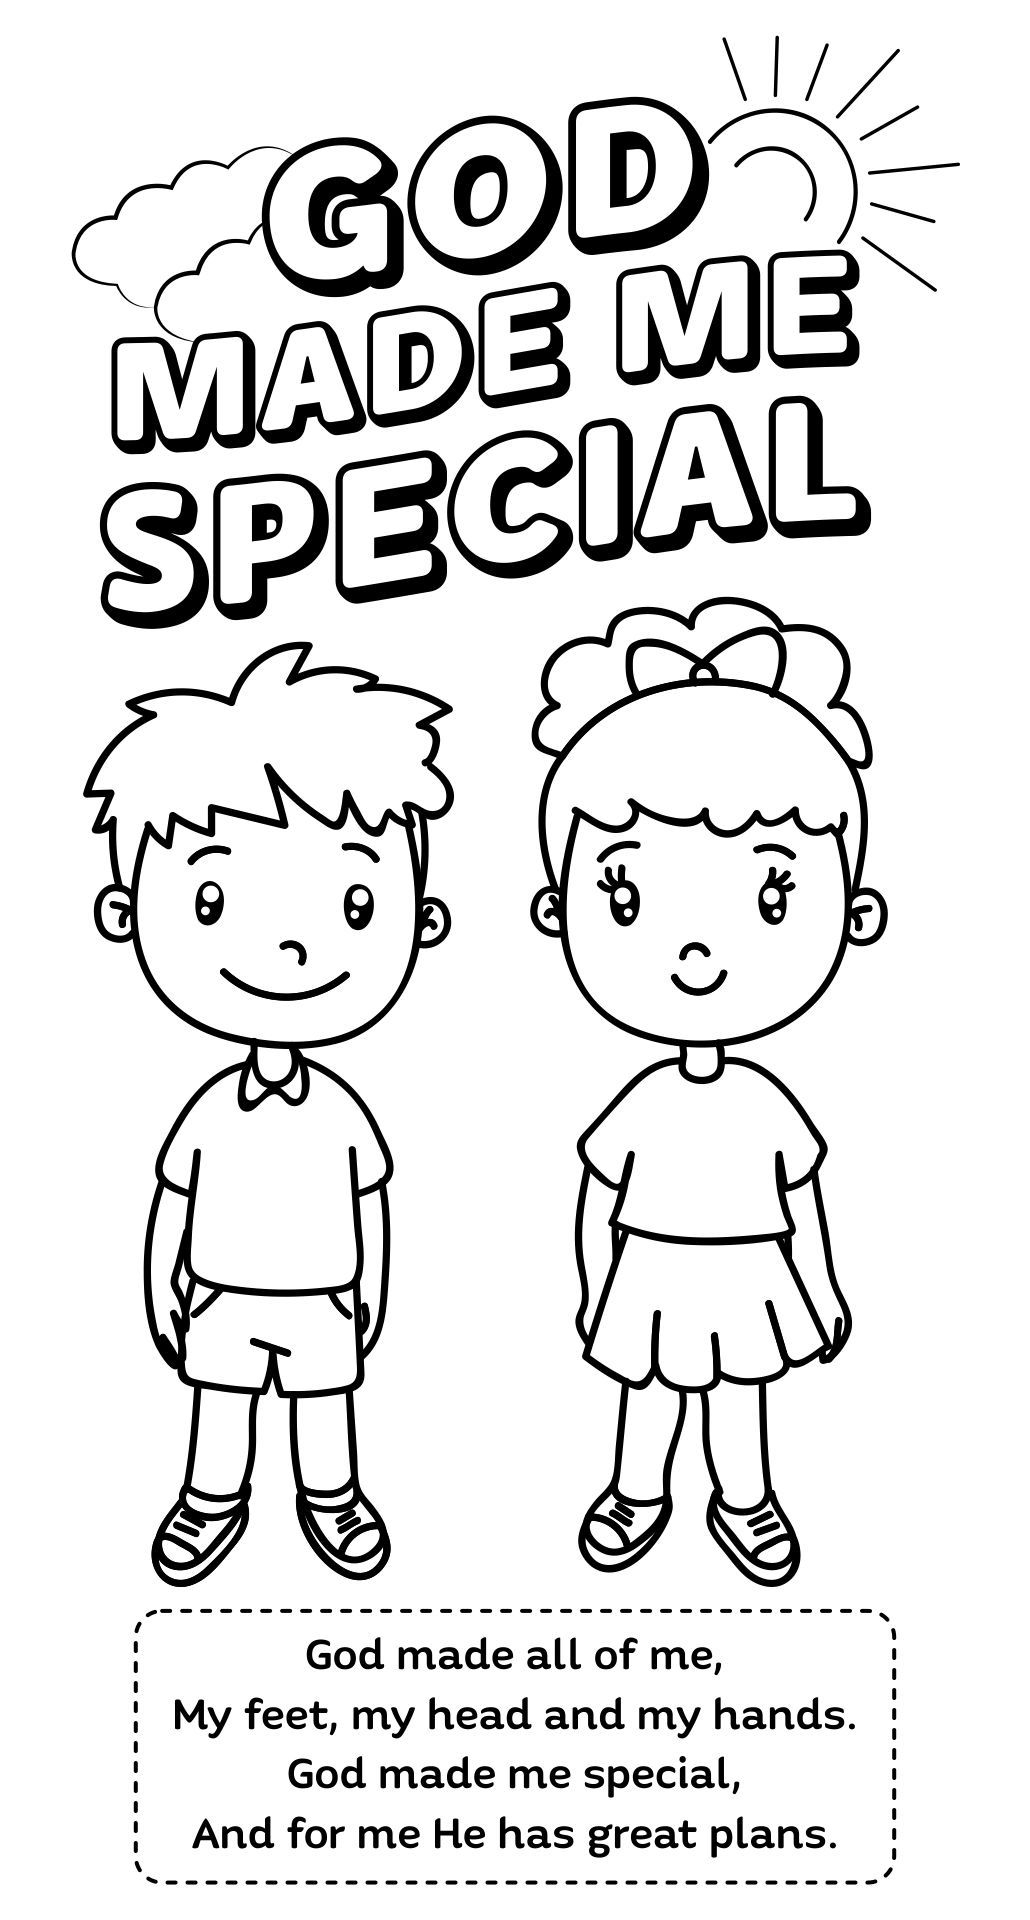 20 Best God Made Me Special Coloring Pages Printables PDF For Free At Printablee Preschool Bible Lessons Bible Lessons For Kids Bible Activities For Kids